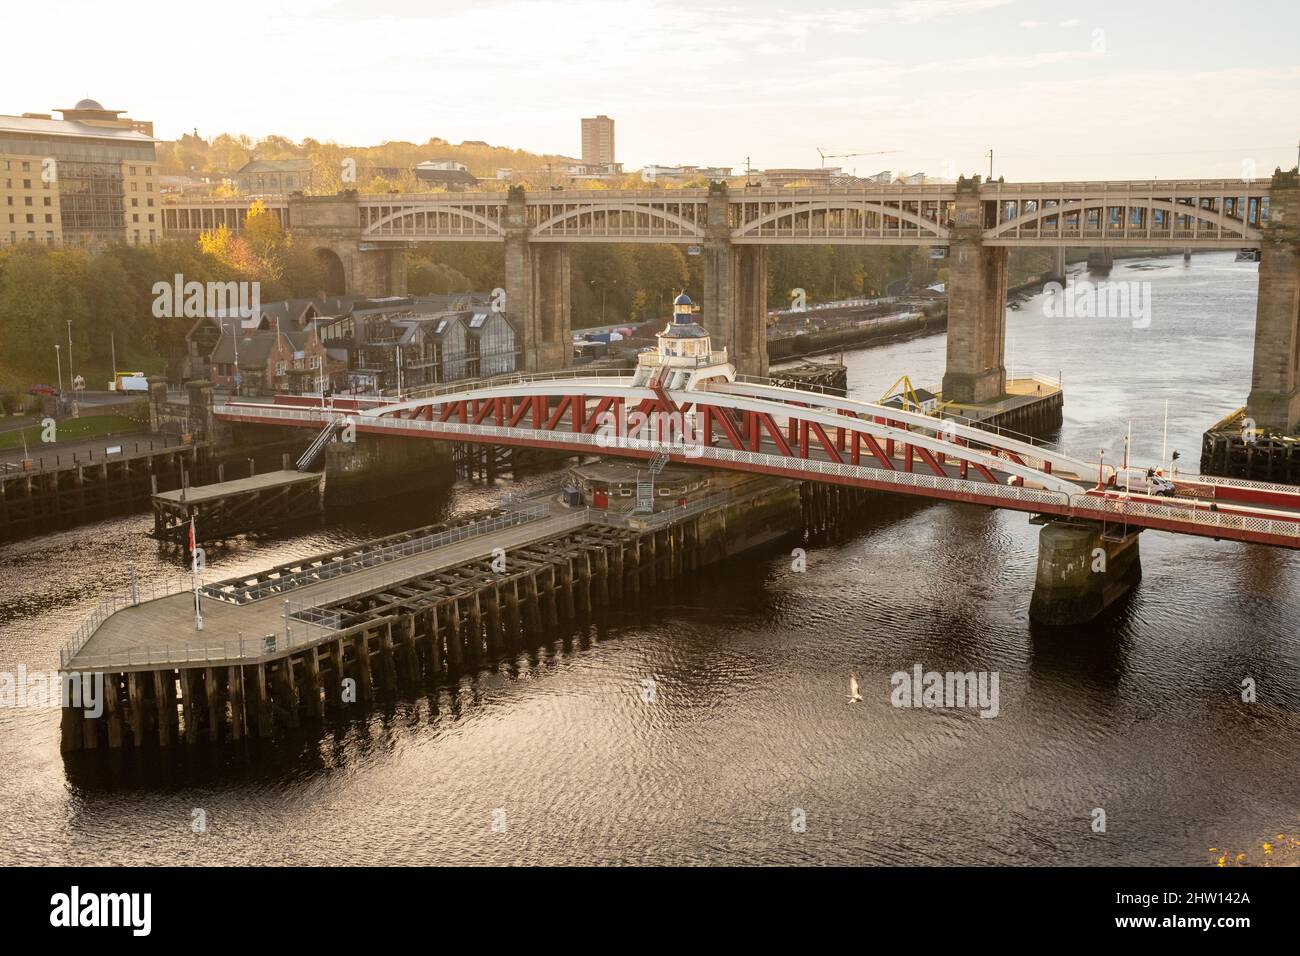 Newcastle UK: 17th Nov 2021, View of the famous Newcastle Swing Bridge in Autumn with beautiful warm winter sunlight Stock Photo